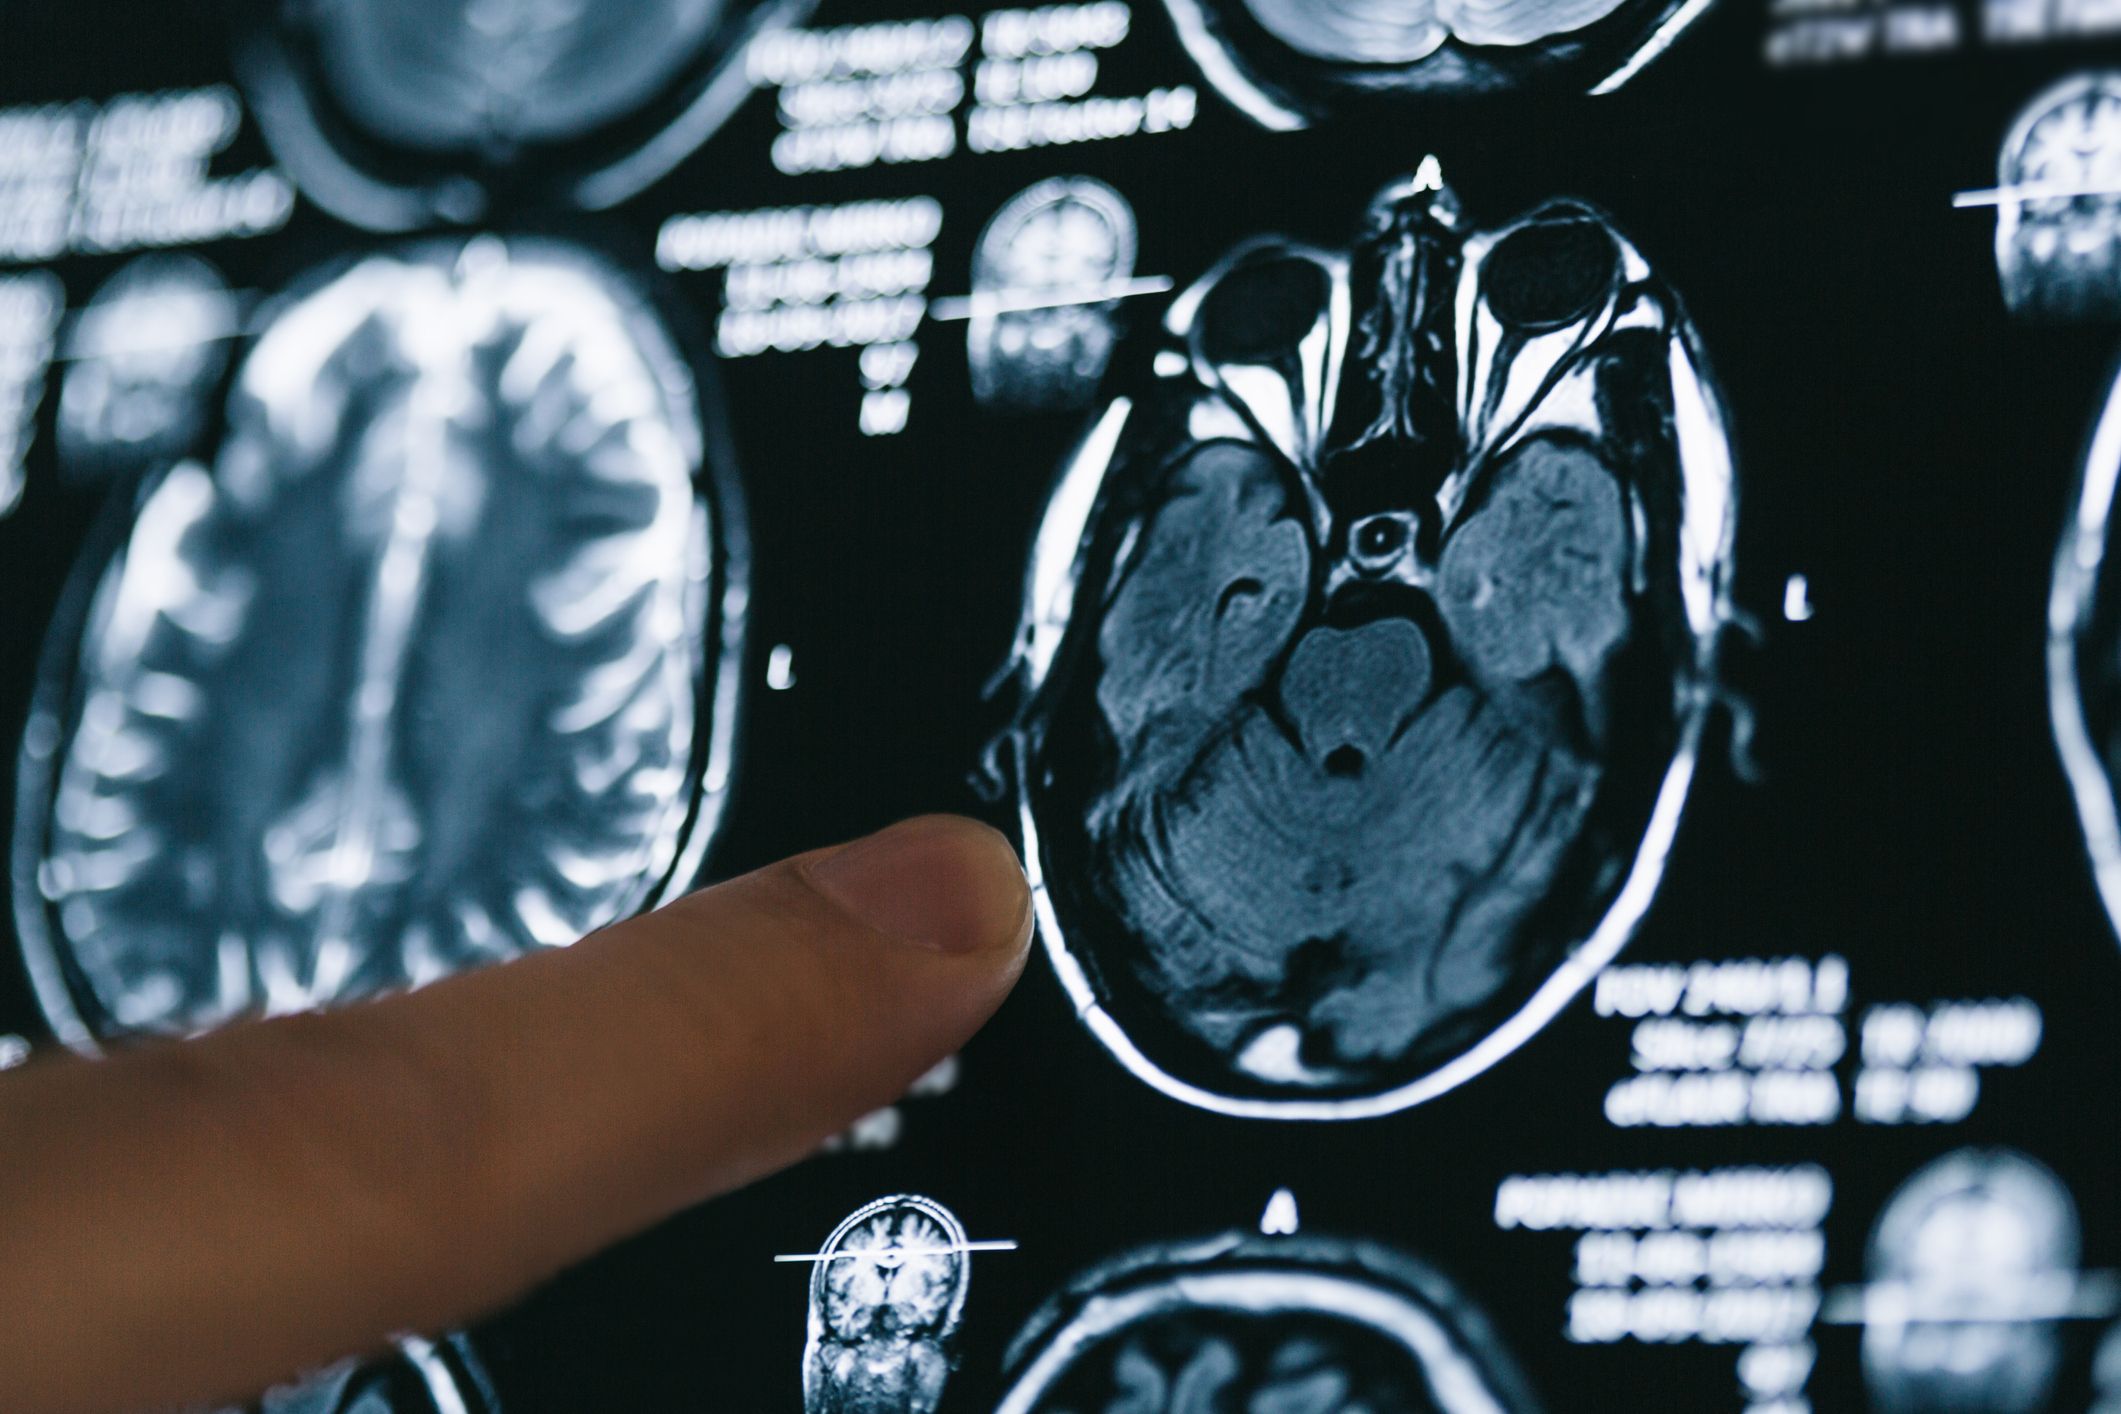 Canadian researchers have a new way to look at glioblastoma.